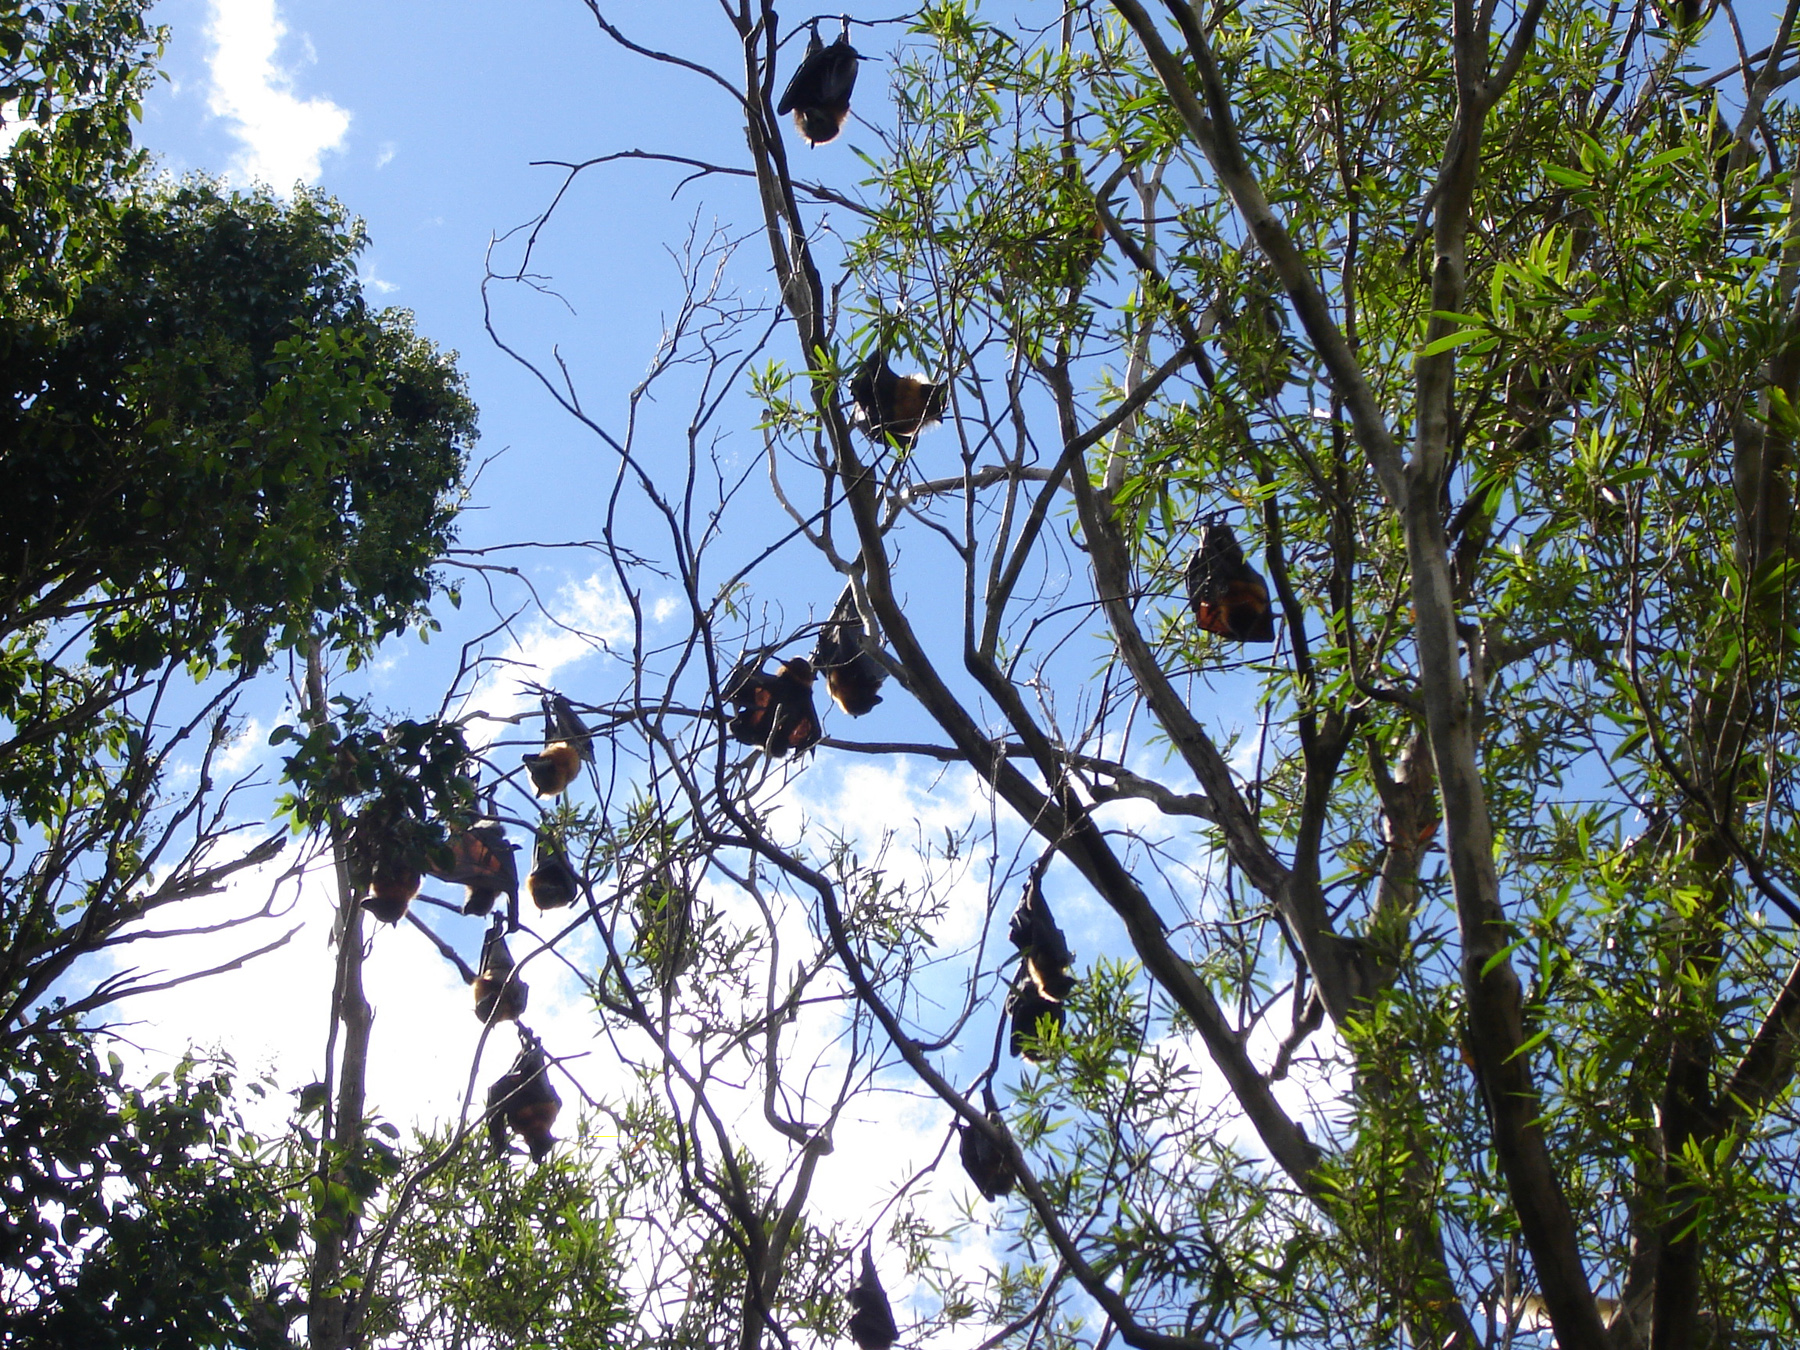 Bats hanging from a tree photo